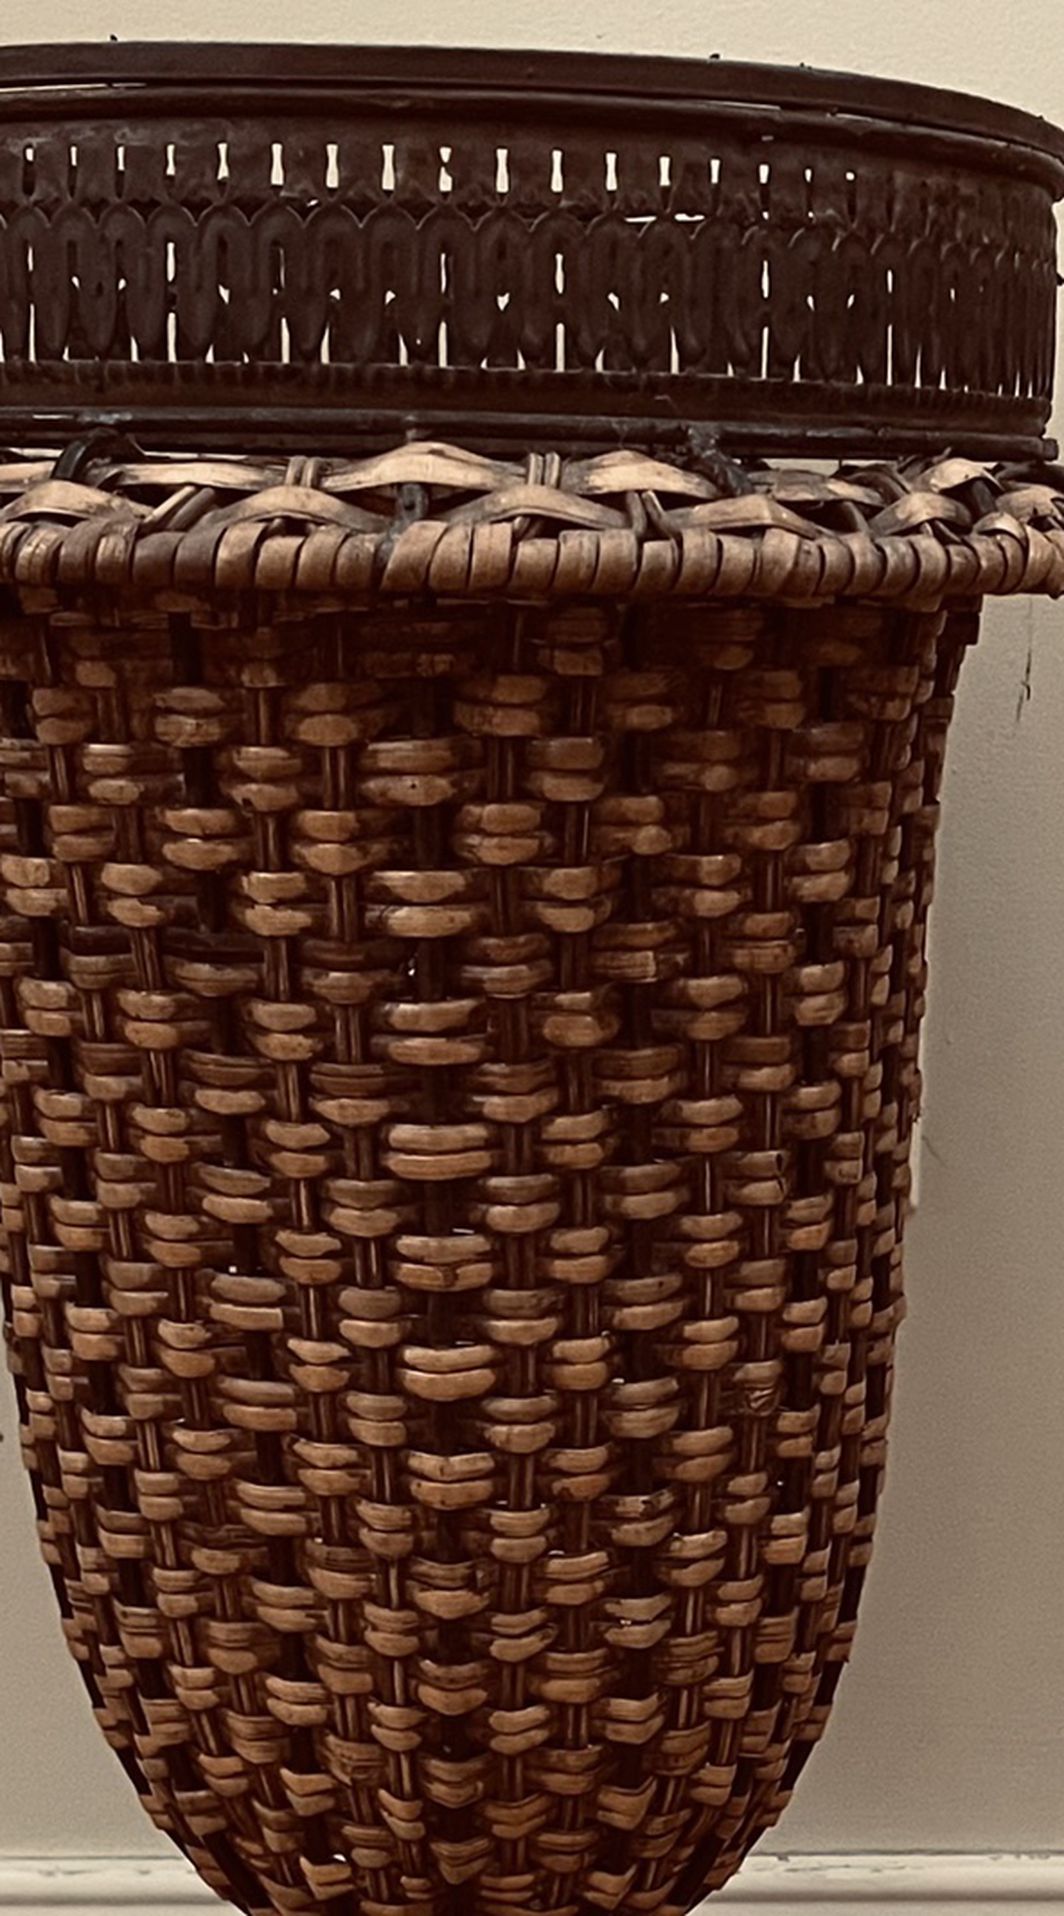 22” Tall & 9 1/2” Wide Wicker Planter Only $15 